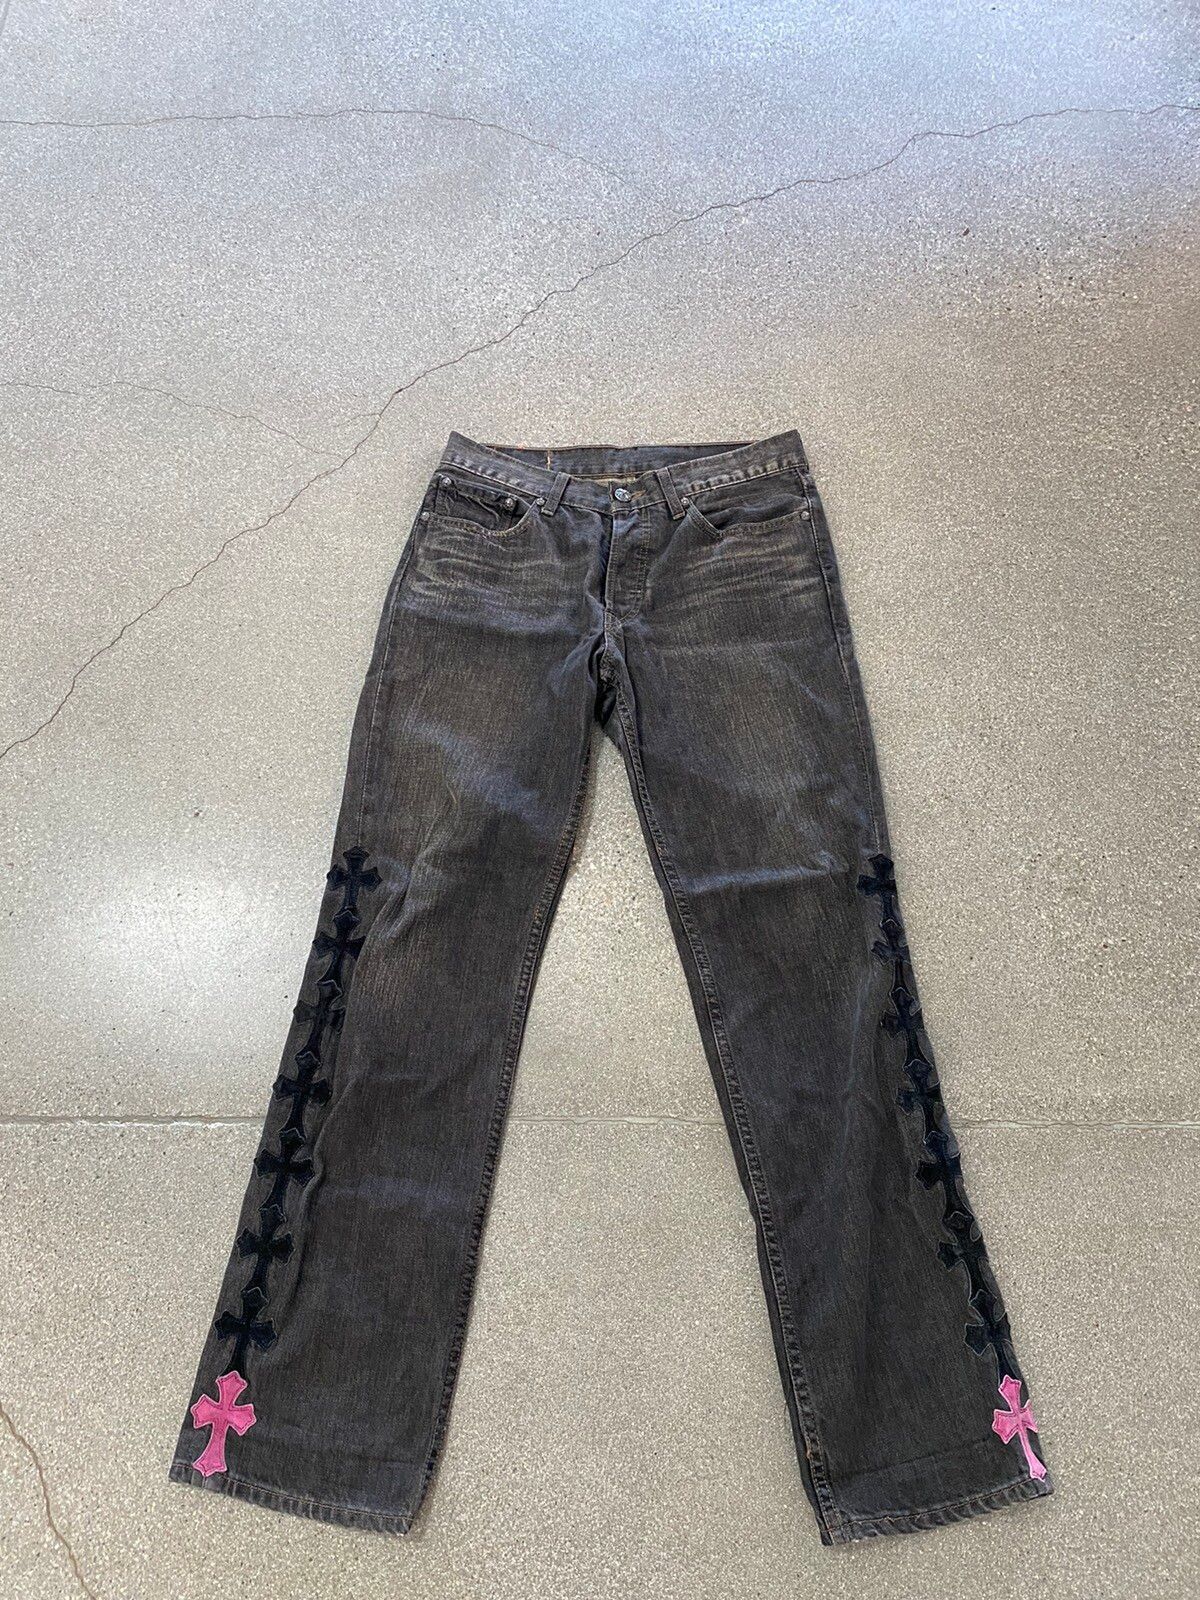 Chrome Hearts Cross Patch Denim Jeans (Special Order) Size US 30 / EU 46 - 1 Preview